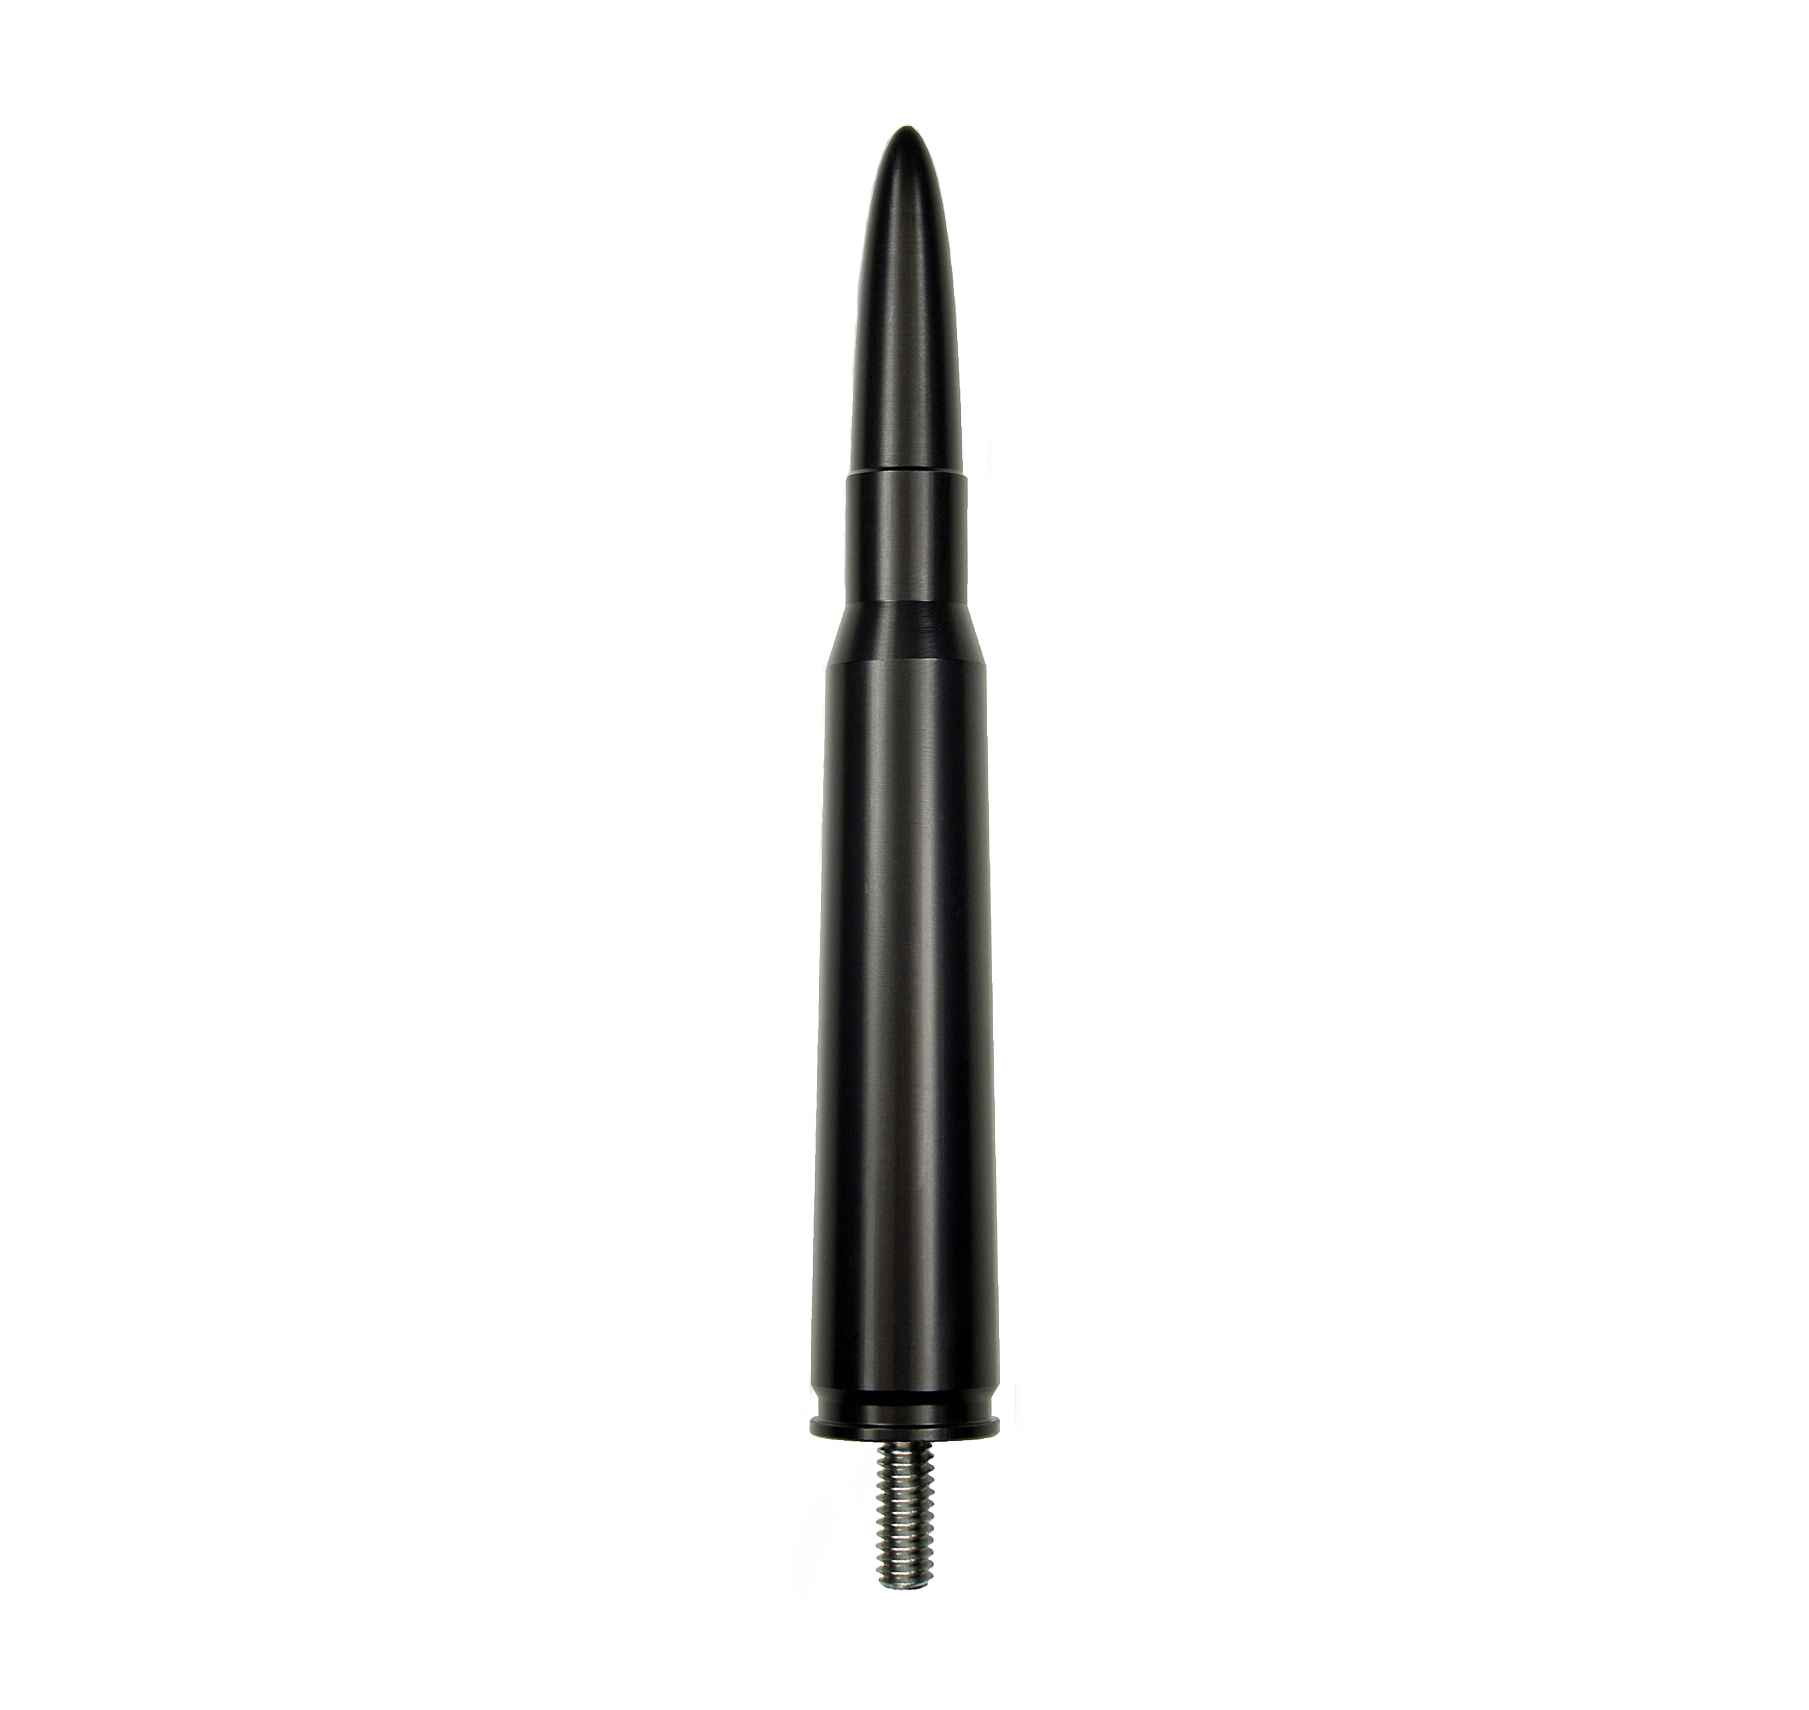 Votex - Made in USA - 50 Caliber Bullet Aluminum Antenna - Part Number A435-BLACK-CANAMLONG